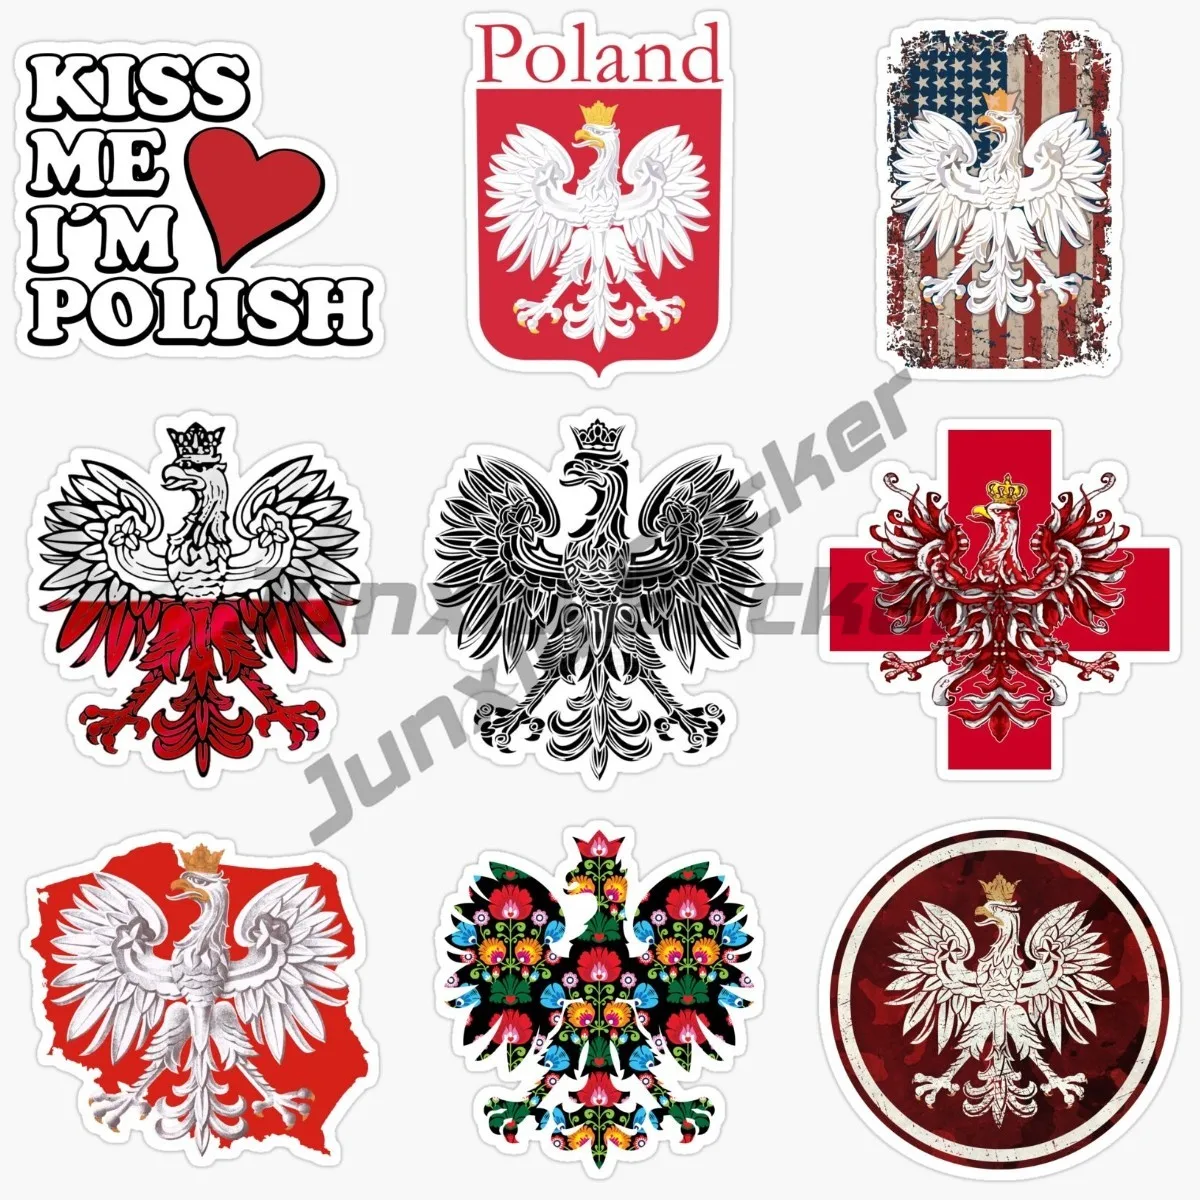 

Polish Coat of Arms Sticker Decal Self Adhesive Vinyl Poland Flag POL PL Stickers for Cars, Bicycles, Laptops, Motos